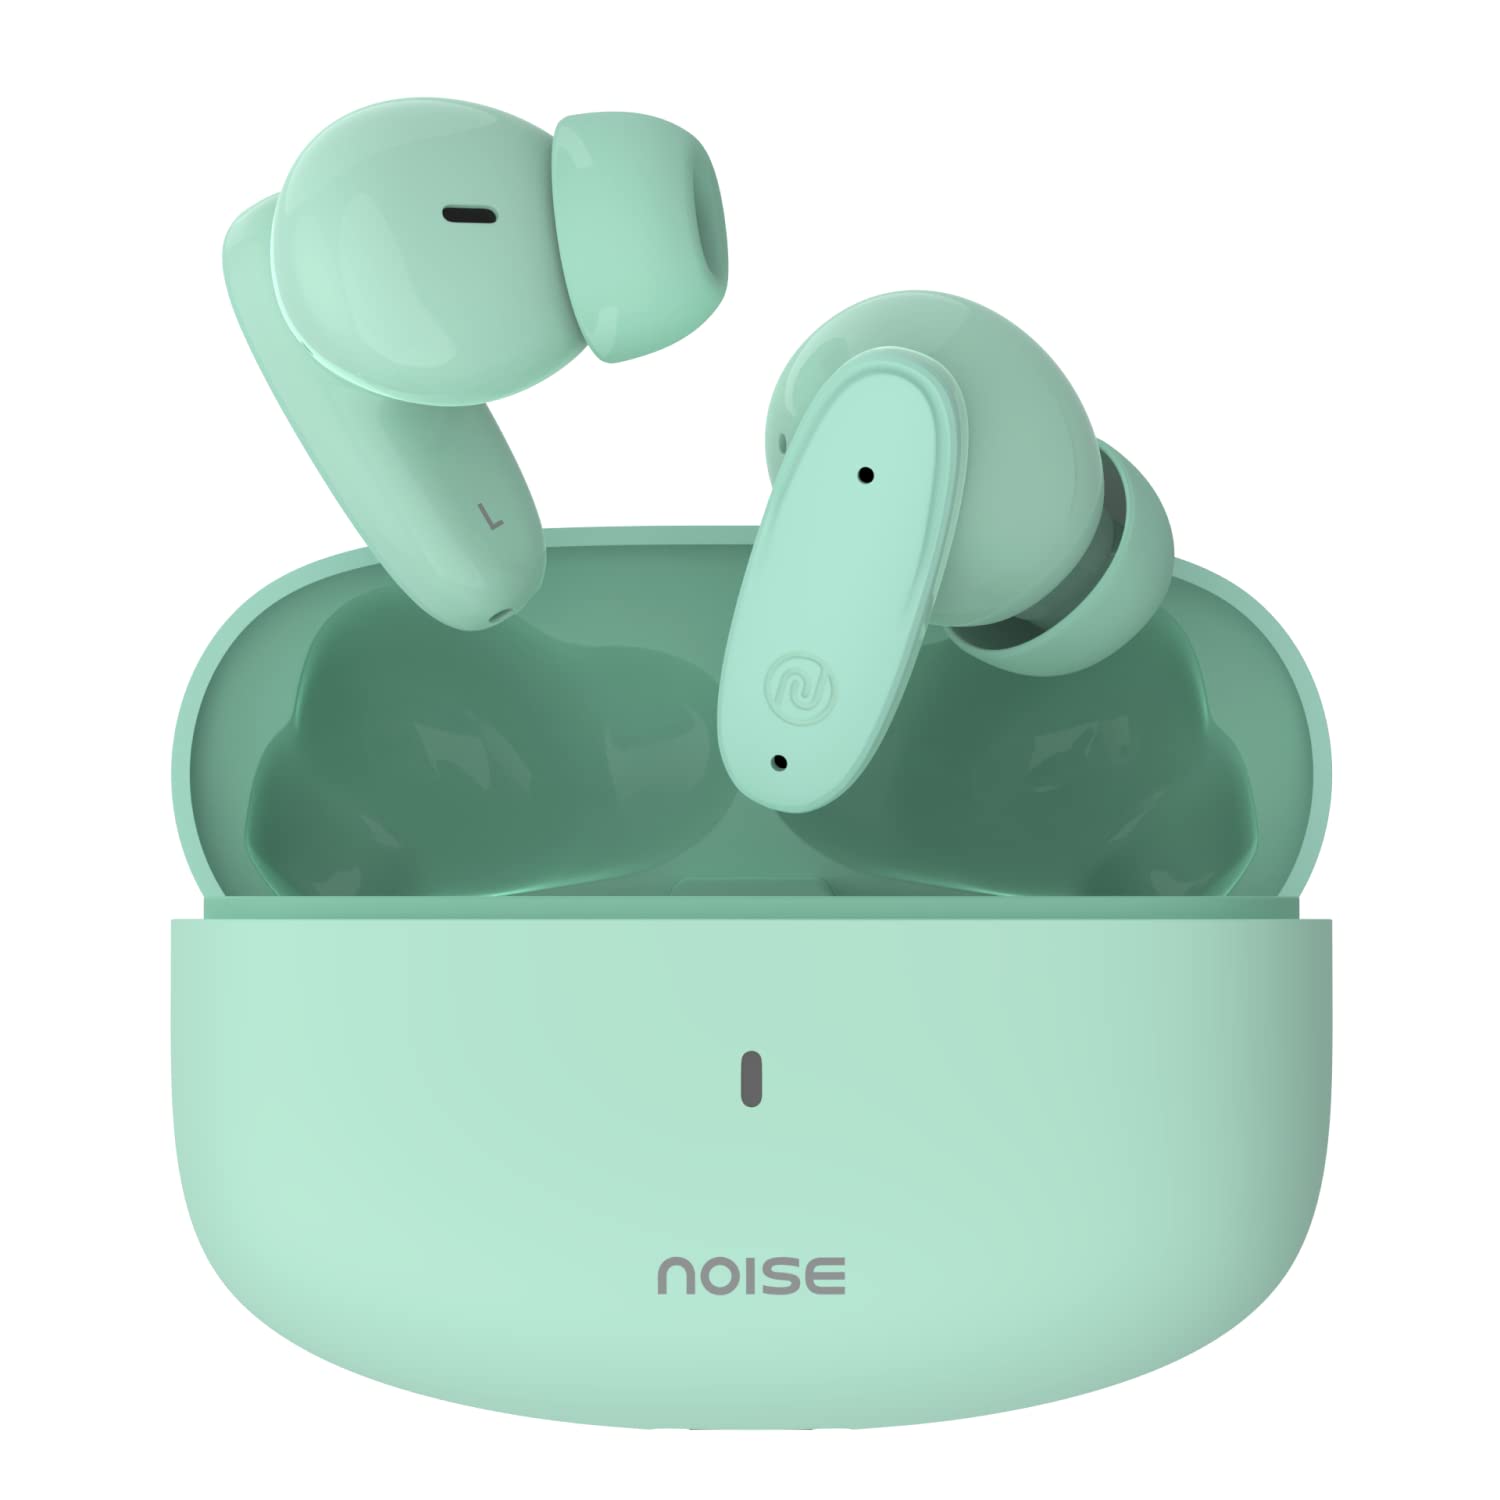 Noise Buds Connect Truly Wireless in Ear Earbuds with 50H Playtime, Quad Mic (Mint Green) - Mahajan Electronics Online